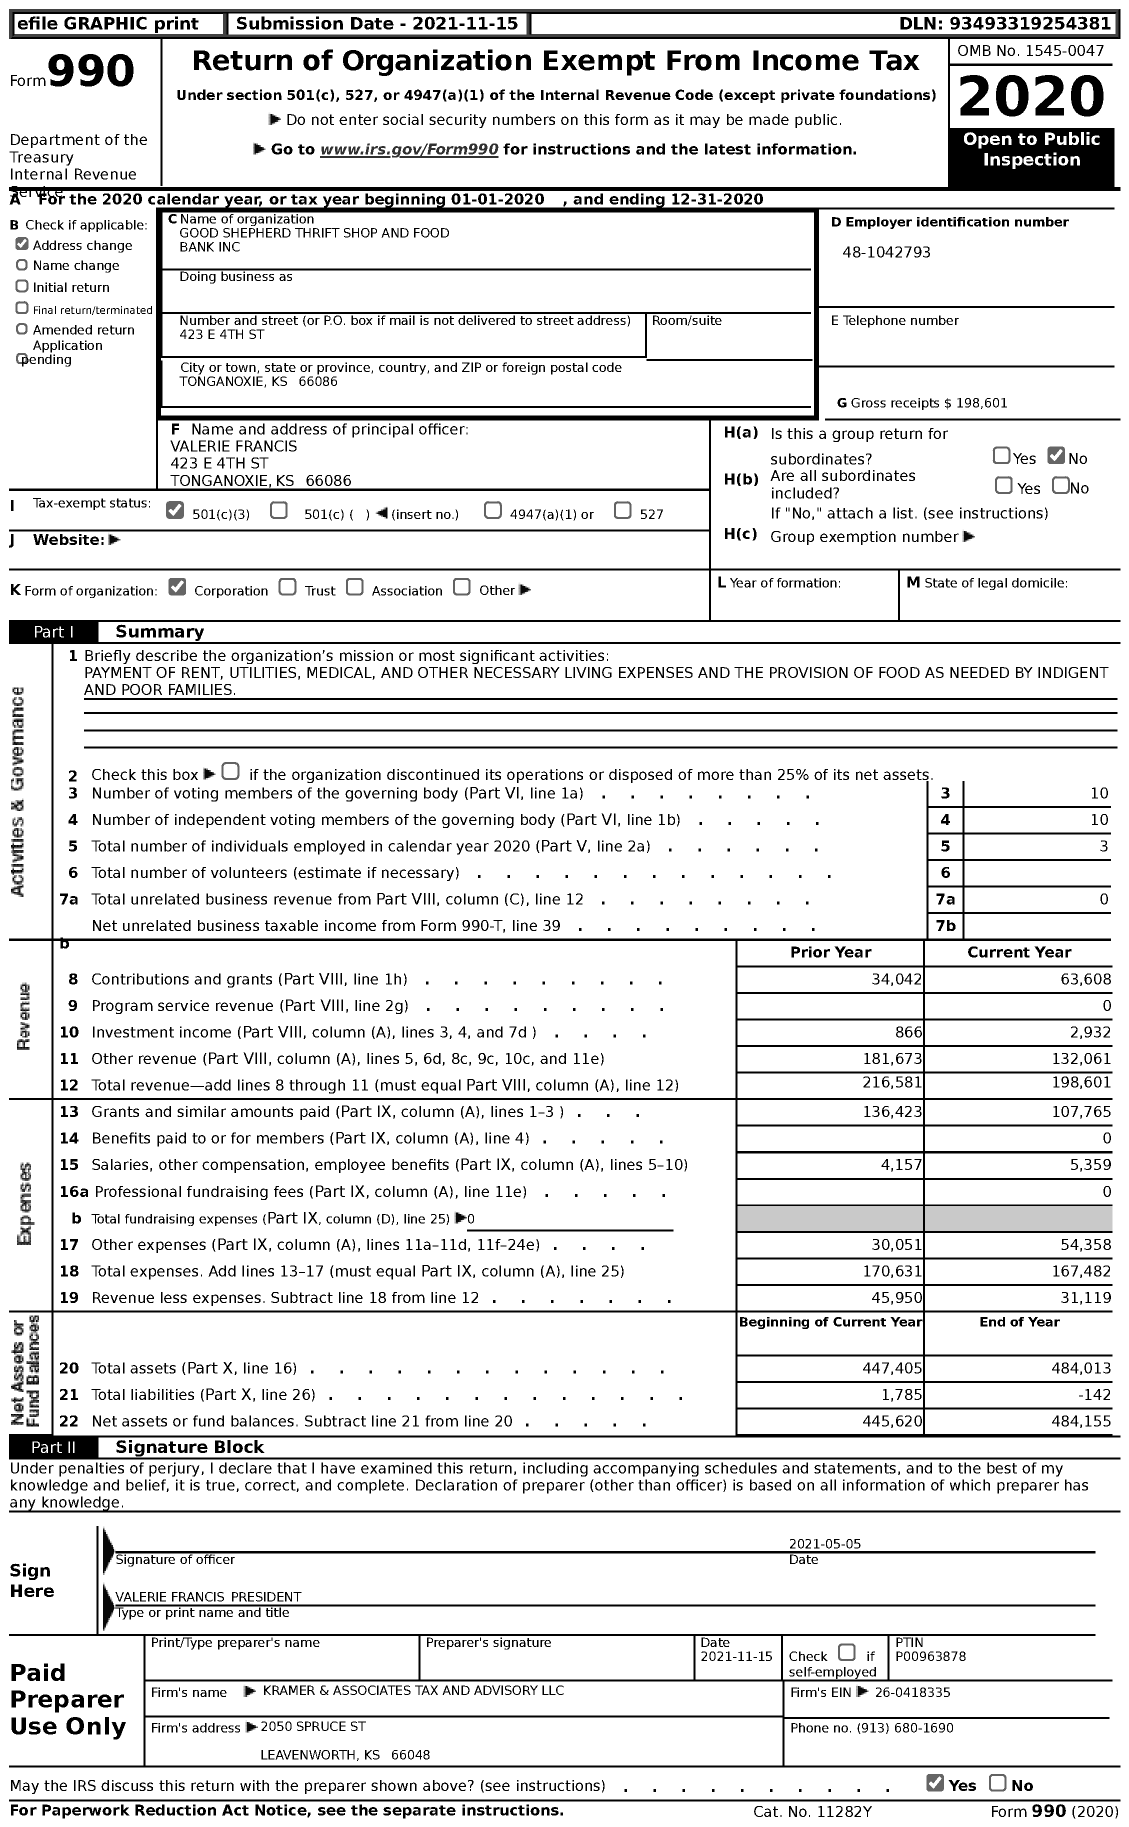 Image of first page of 2020 Form 990 for Good Shepherd Thrift Shop and Food Bank